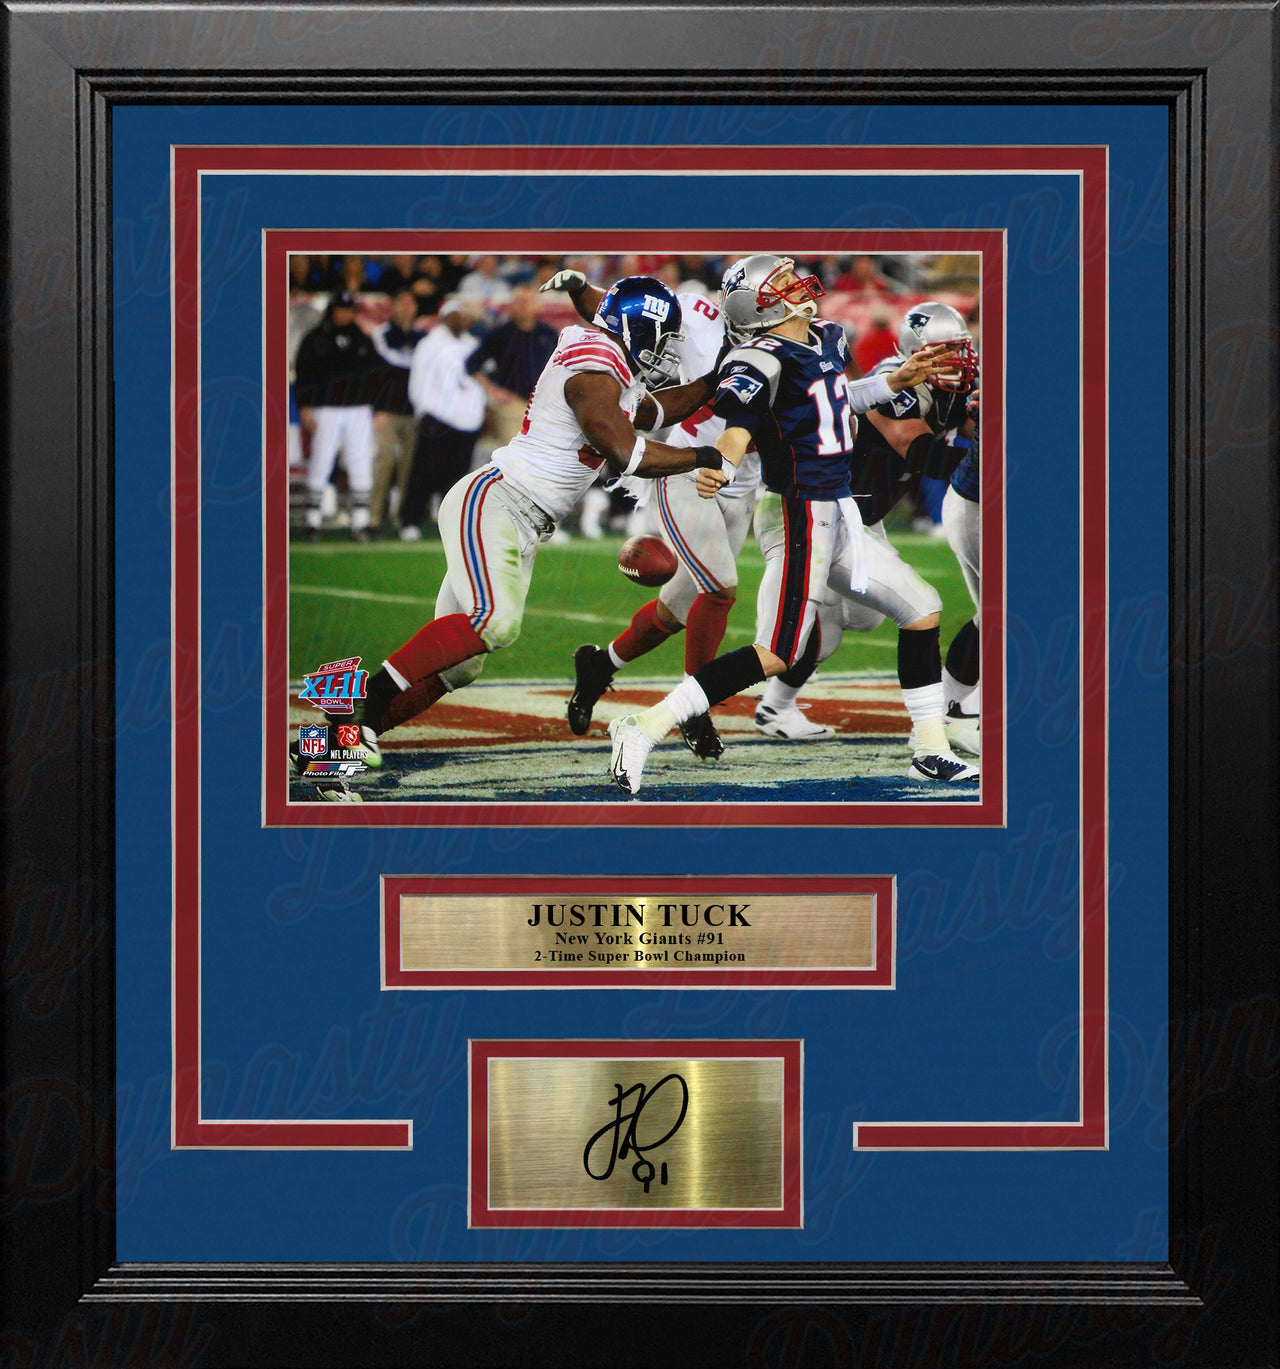 Justin Tuck Hits Tom Brady Super Bowl XLII NY Giants 8x10 Framed Photo with Engraved Autograph